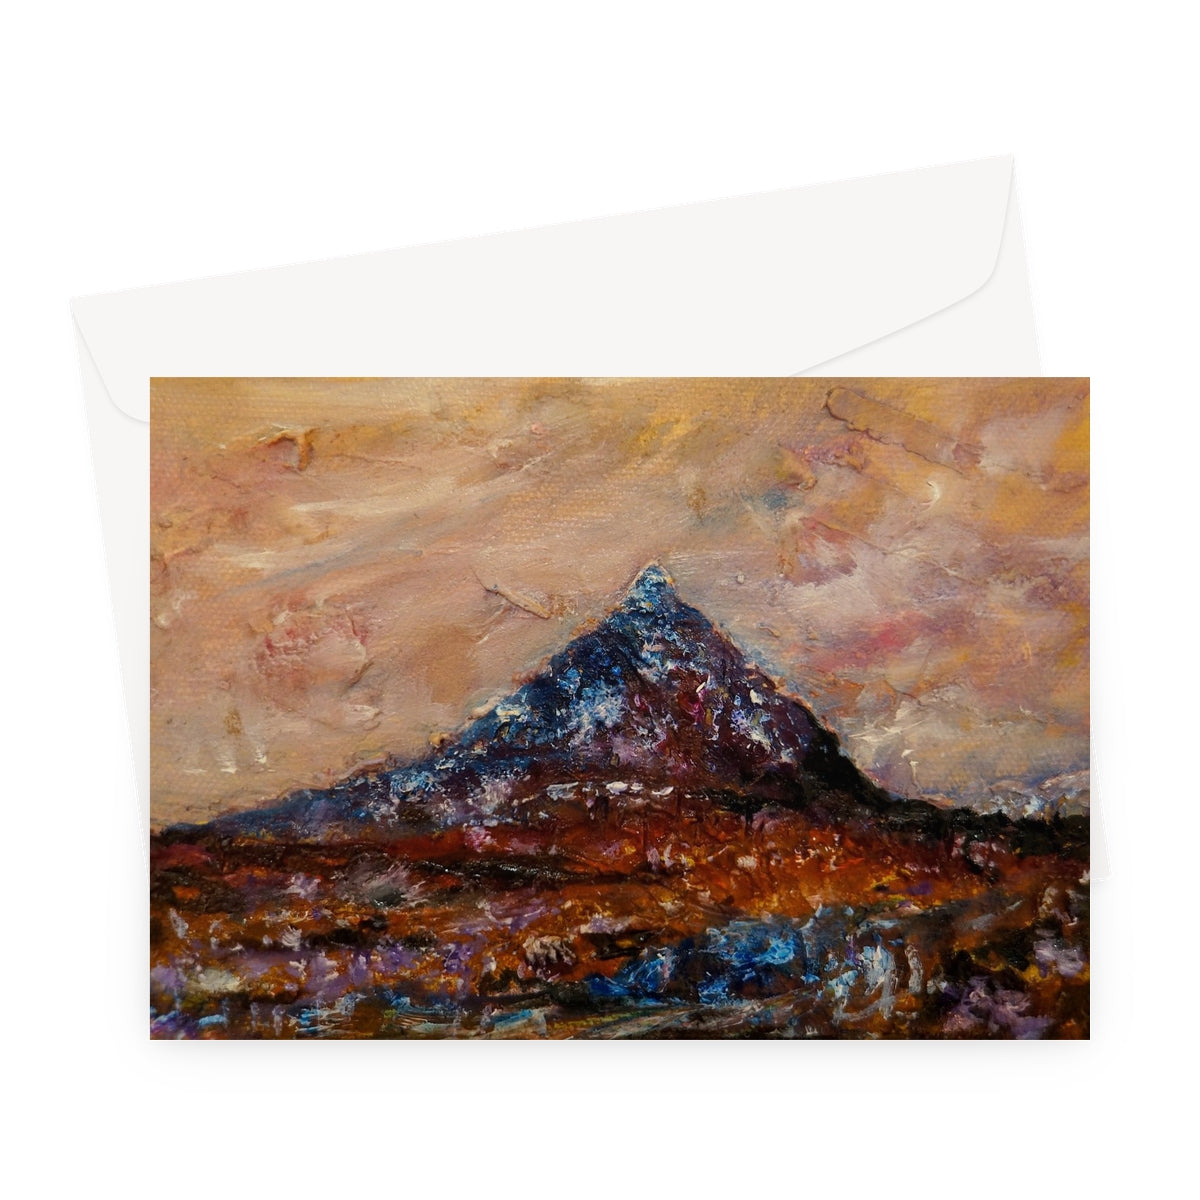 Buachaille Etive Mòr Art Gifts Greeting Card-Greetings Cards-Glencoe Art Gallery-A5 Landscape-1 Card-Paintings, Prints, Homeware, Art Gifts From Scotland By Scottish Artist Kevin Hunter